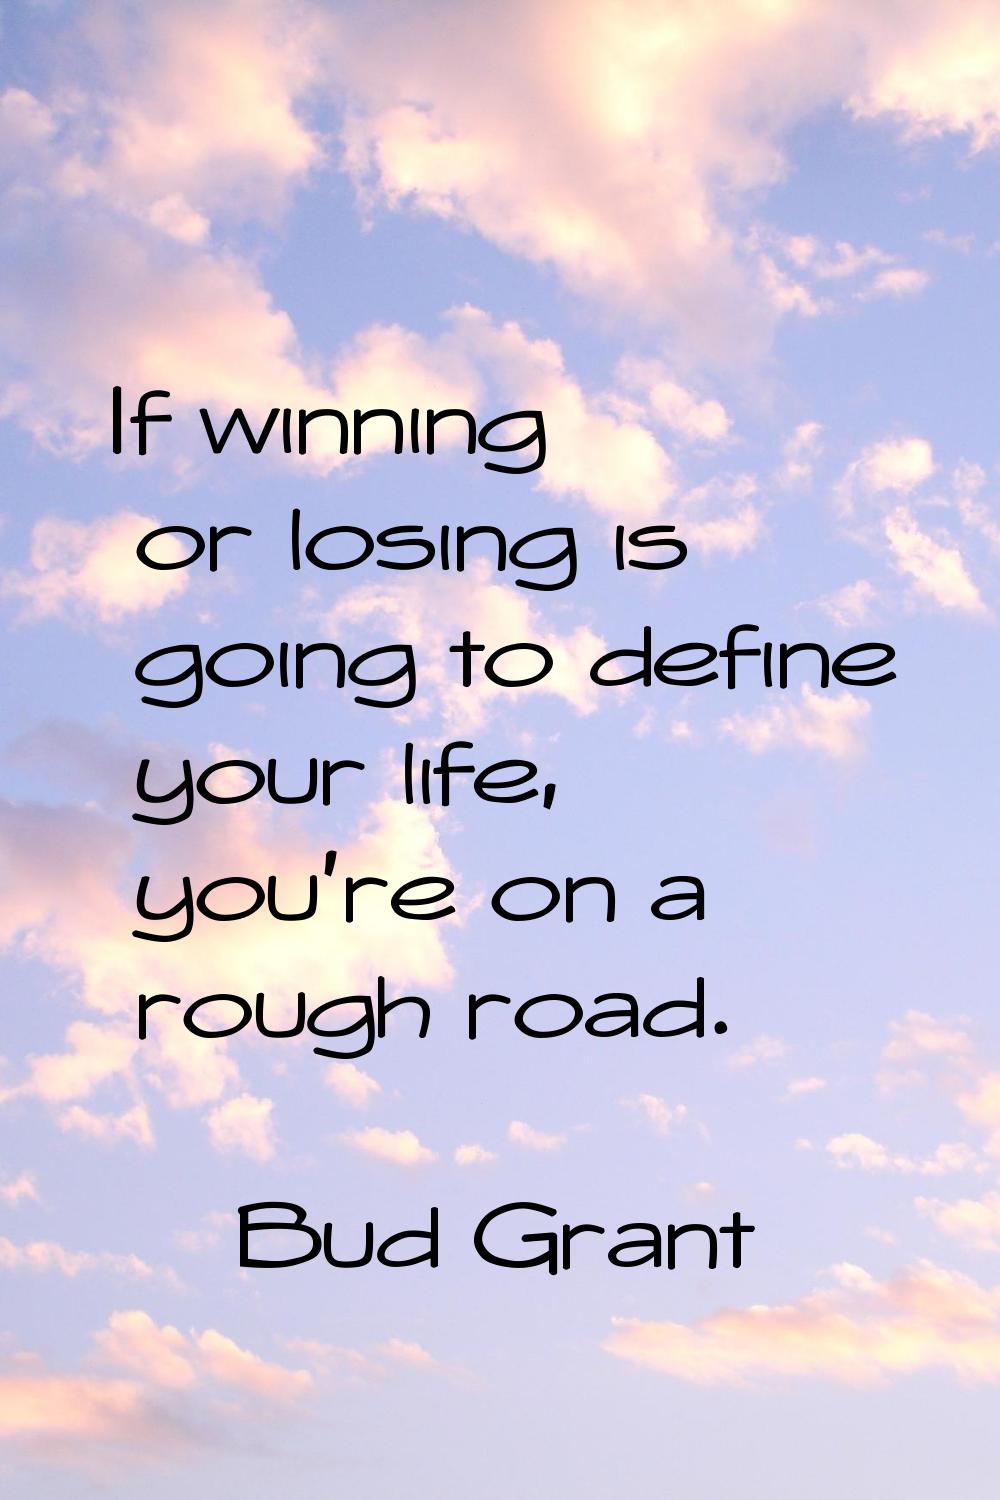 If winning or losing is going to define your life, you're on a rough road.